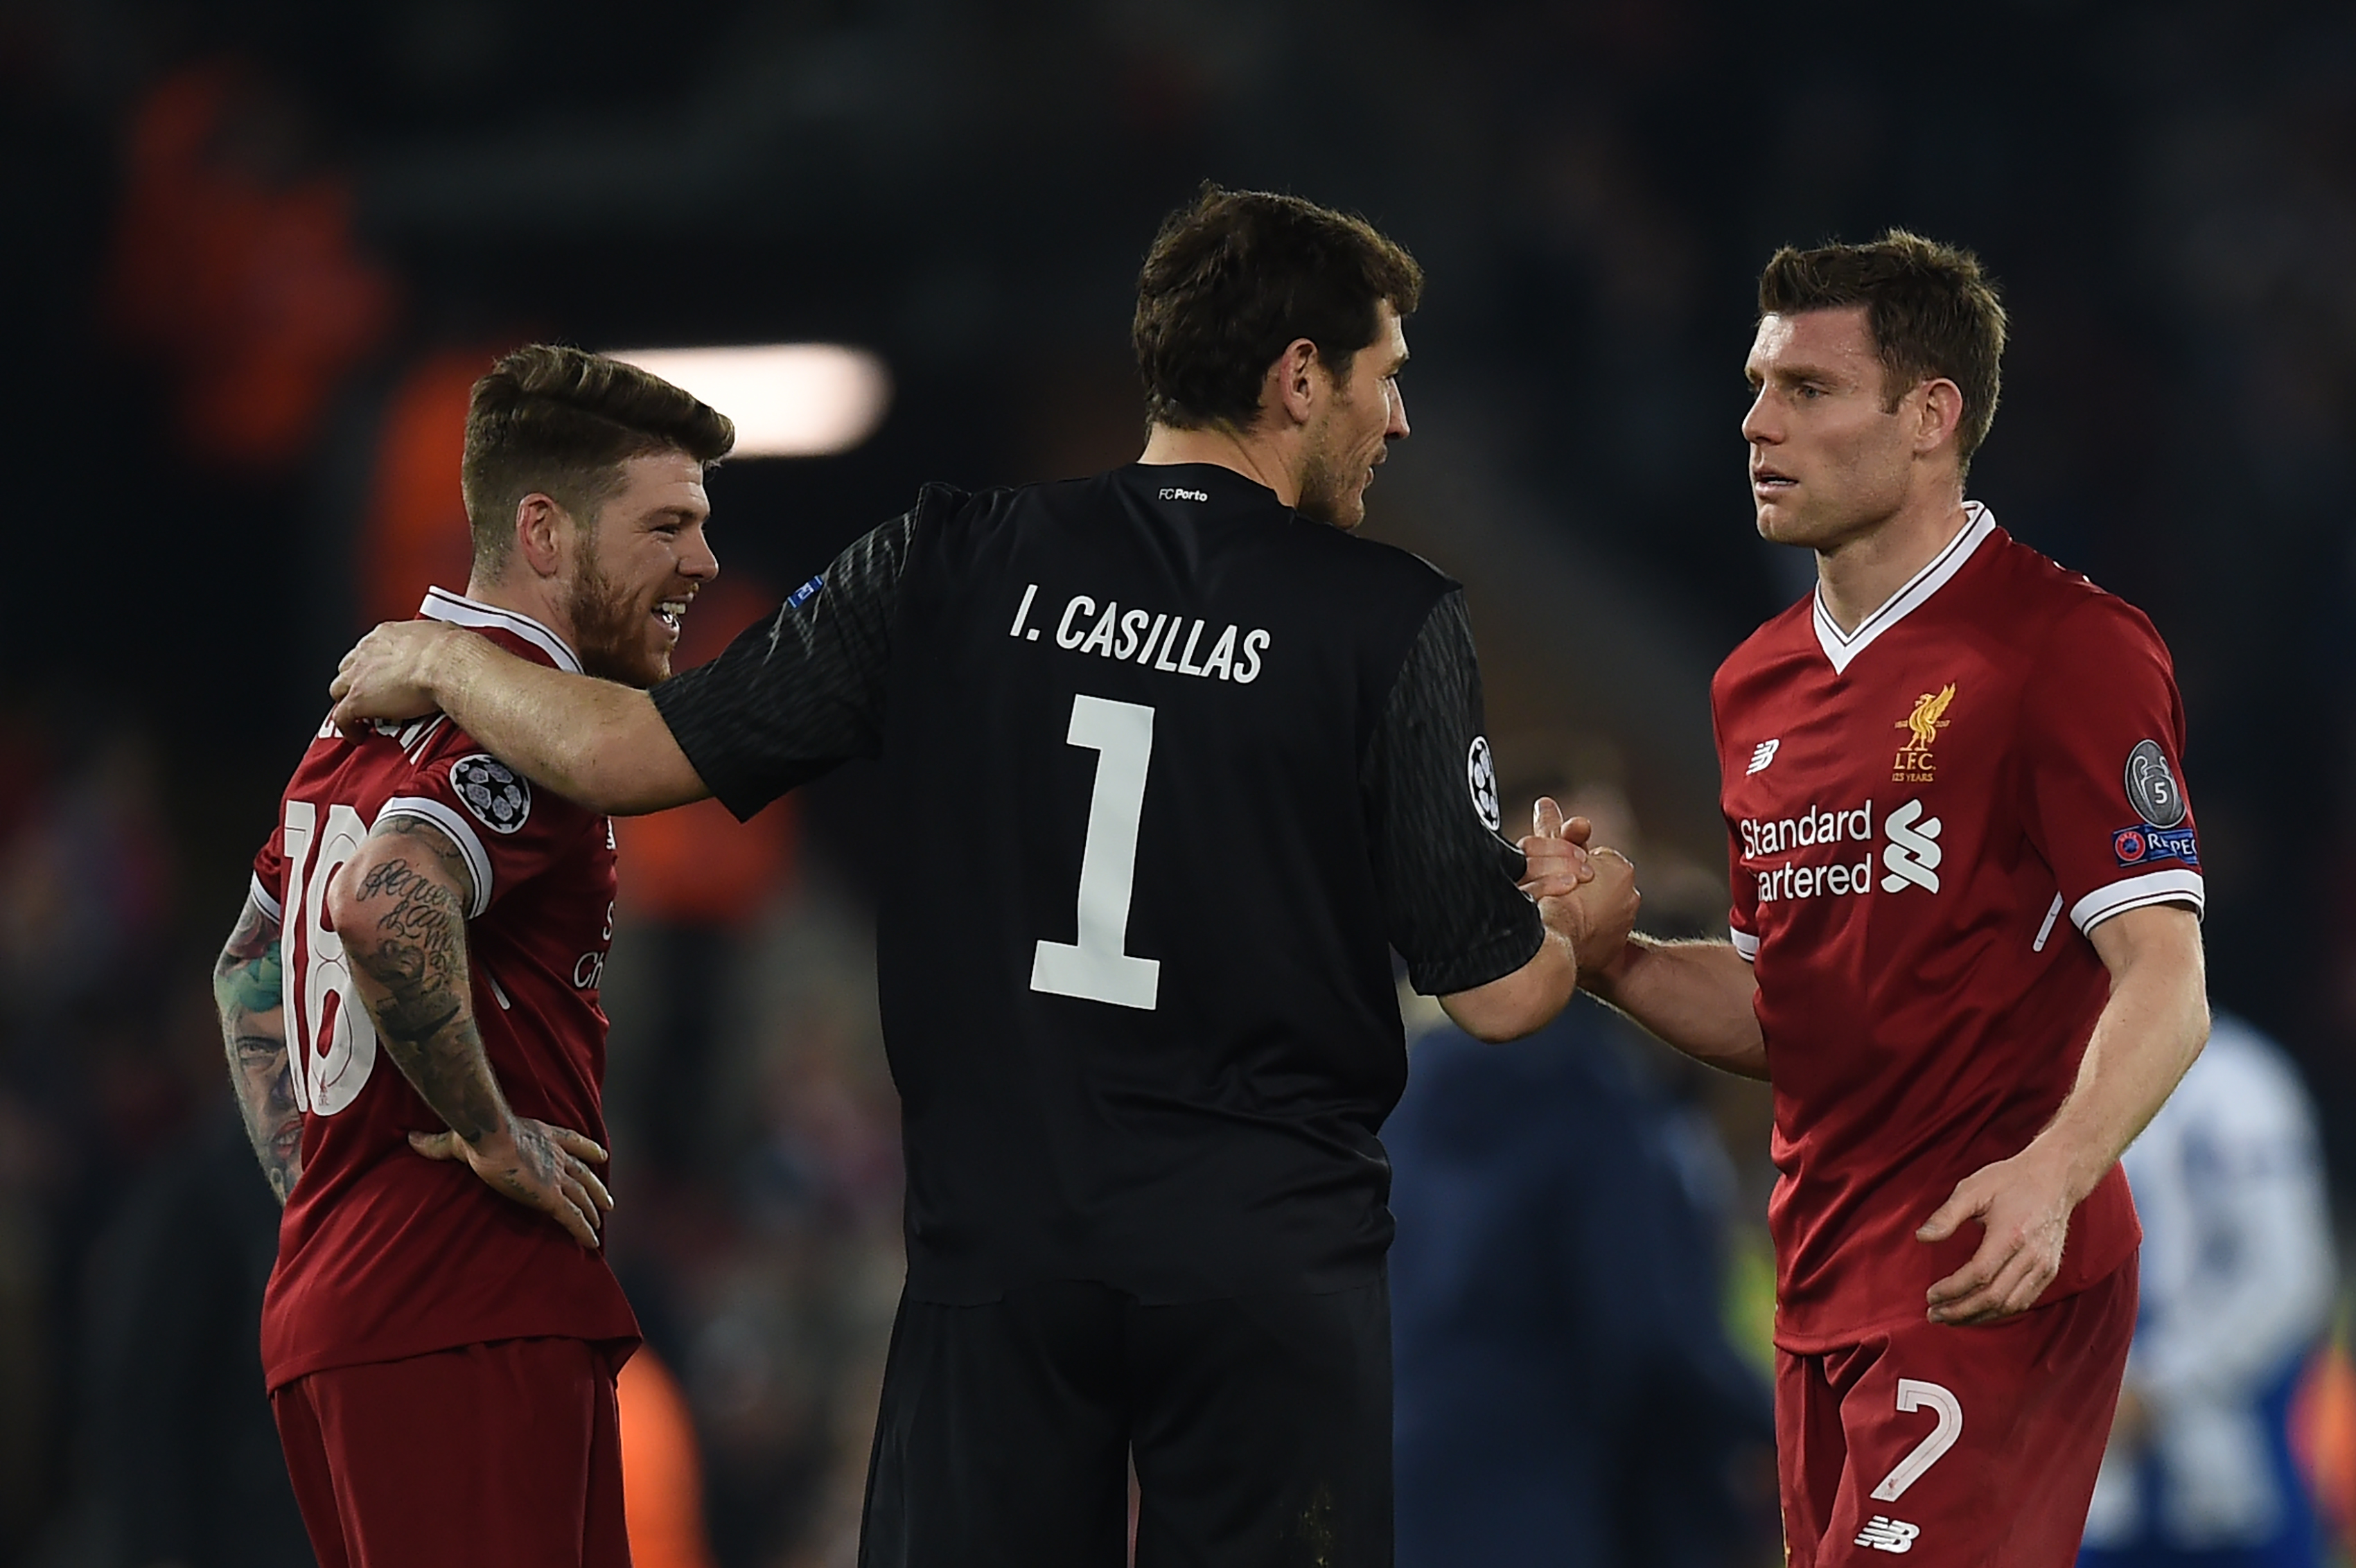 Porto's Spanish goalkeeper Iker Casillas (C) greets Liverpool's Spanish defender Alberto Moreno (L) and Liverpool's English midfielder James Milner after the UEFA Champions League round of sixteen second leg football match between Liverpool and FC Porto at Anfield in Liverpool, north-west England on March 6, 2018. / AFP PHOTO / PAUL ELLIS        (Photo credit should read PAUL ELLIS/AFP/Getty Images)